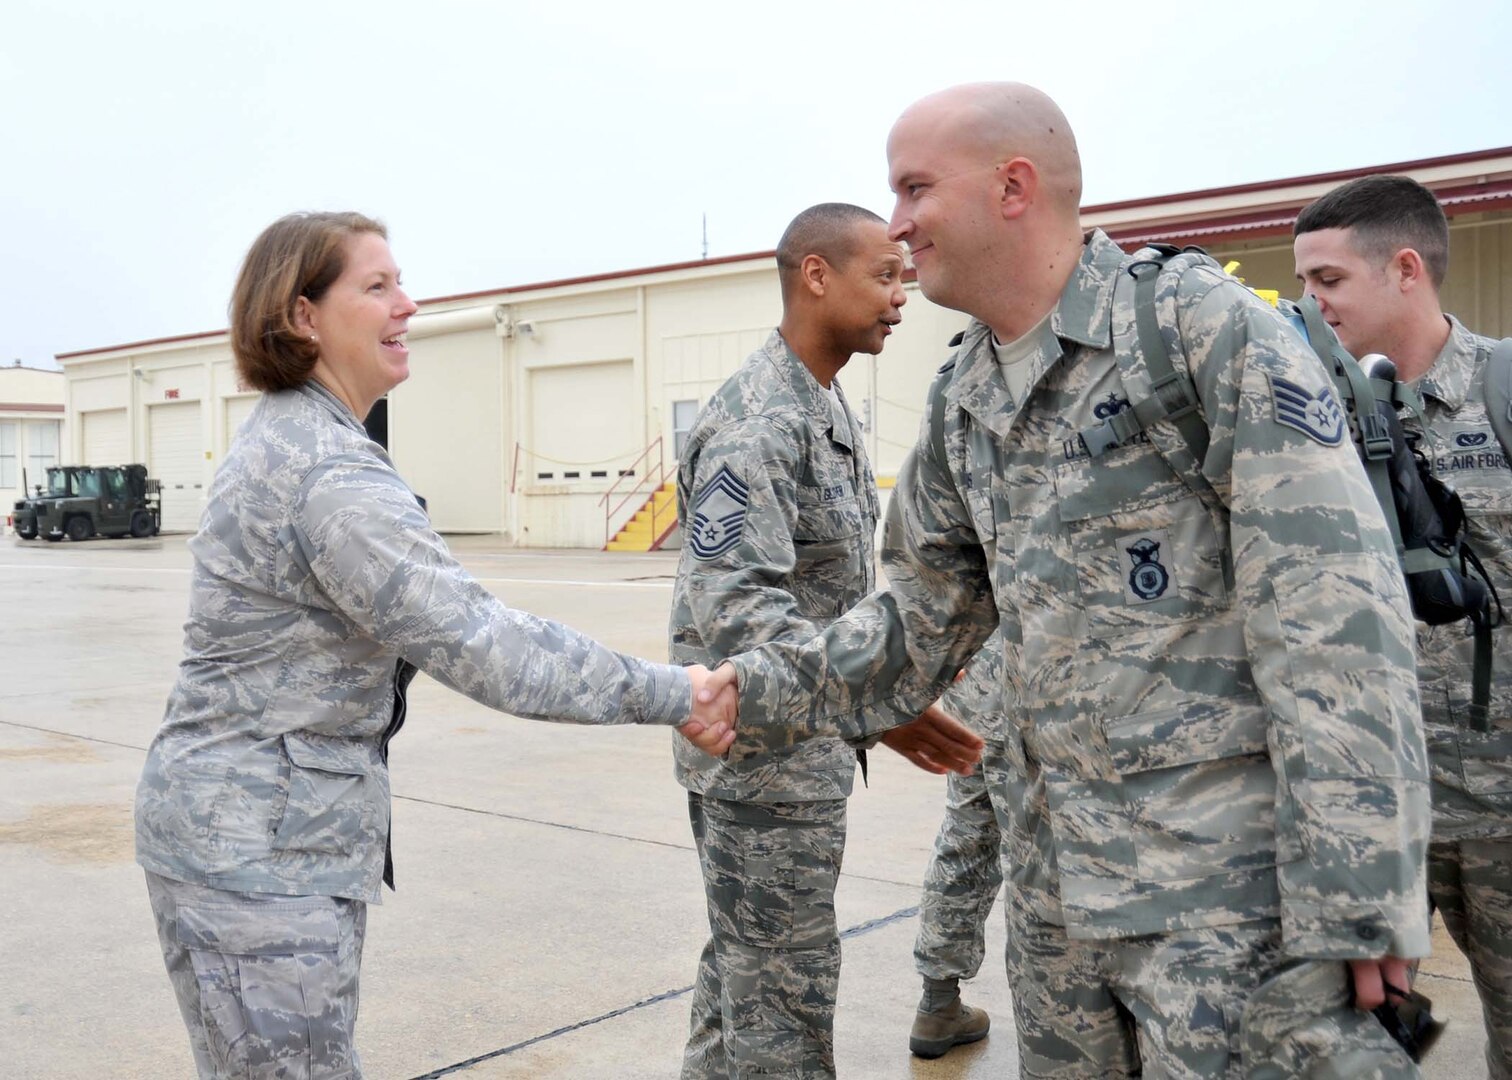 Lt. Col. Kara Neuse, 802nd Mission Support Group deputy commander, shakes hands with Staff Sgt. Alan Dupuis before he boards a plane at Lackland's Kelly Field Annex flightline Dec. 22. Sergeant Dupuis, 802nd Security Forces Squadron, is among more than 45 Airmen from Lackland, Goodfellow, Dyess and Randolph Air Force Bases deploying to Iraq in support of Operation New Dawn. (U.S. Air Force photo/Alan Boedeker)